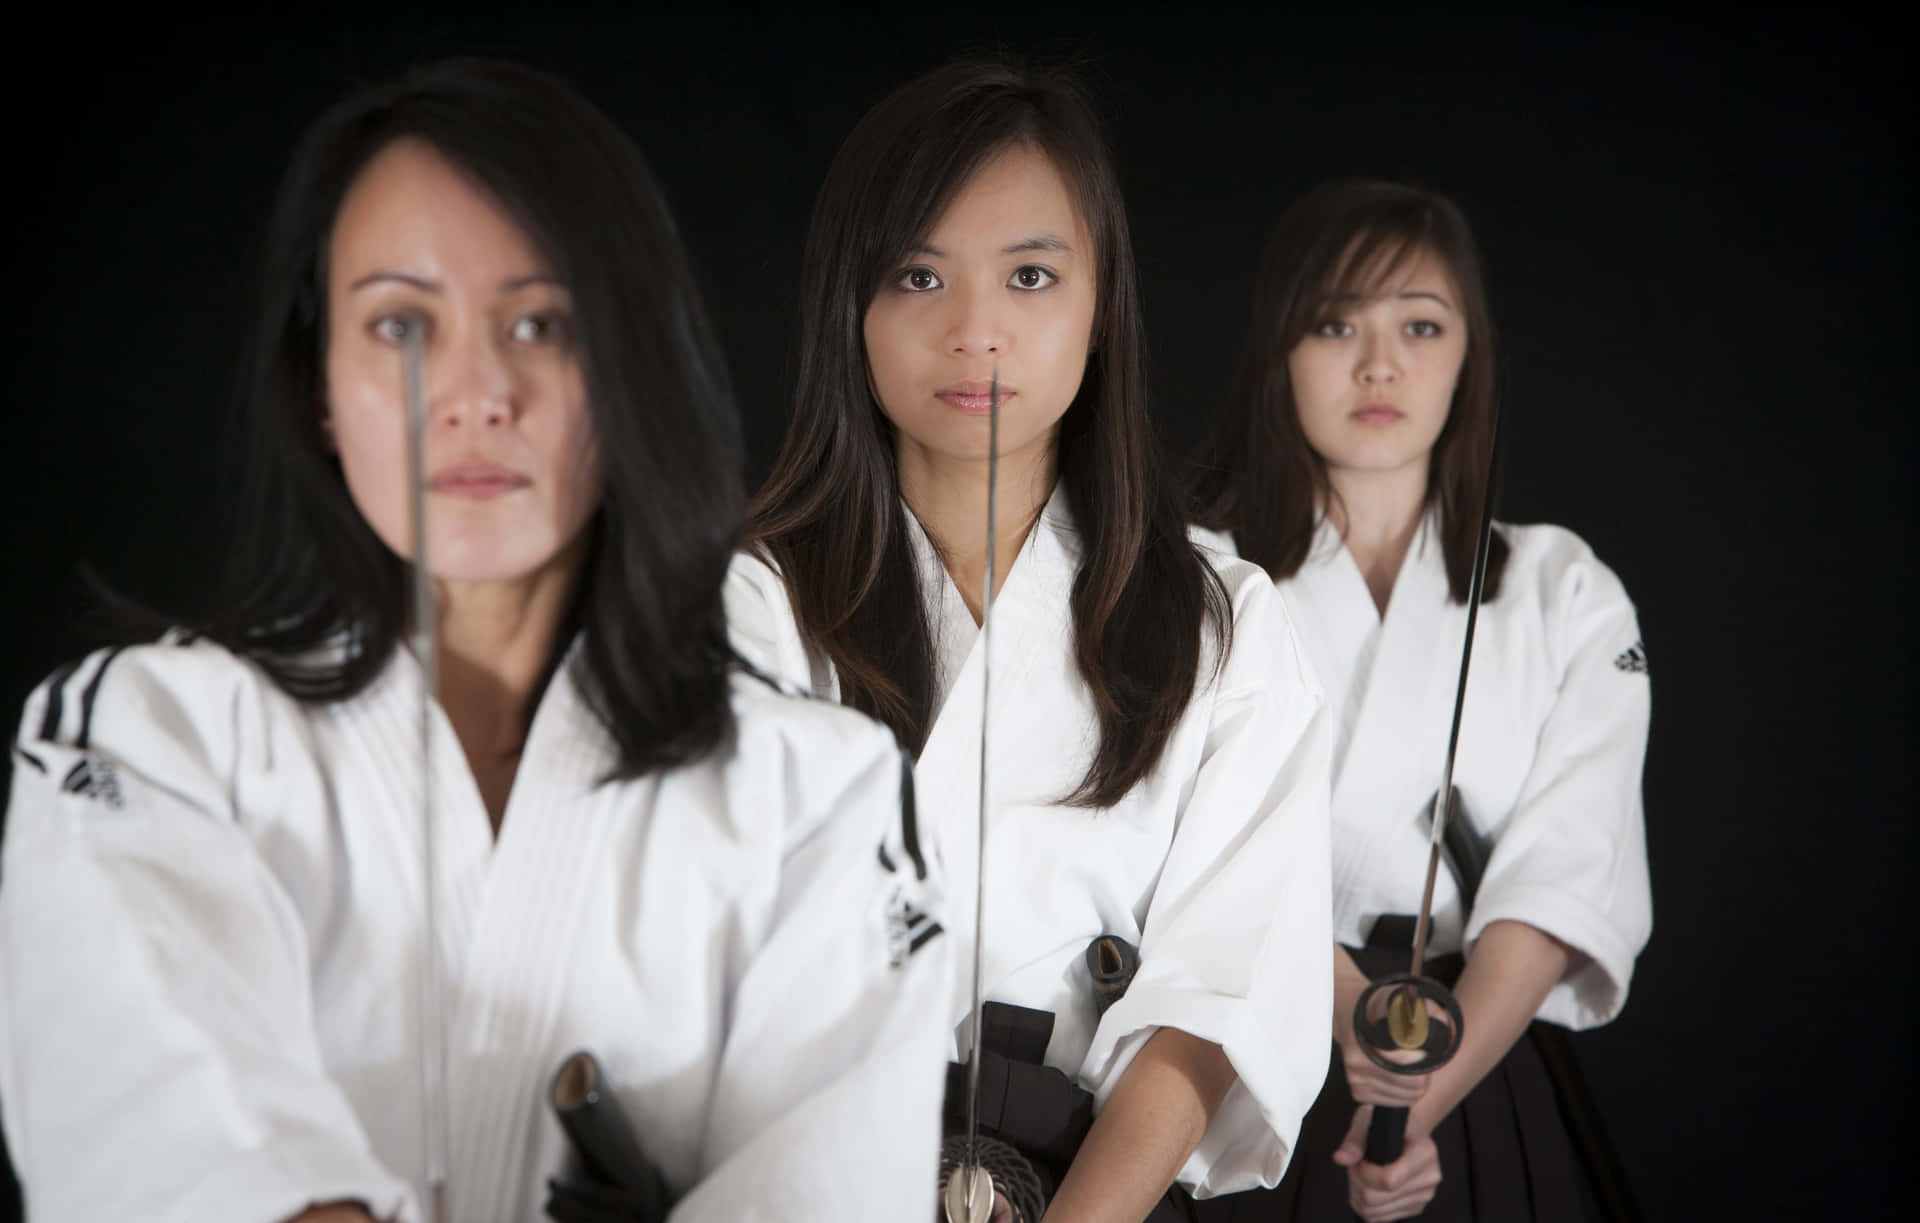 Martial Arts Expert Poised for Action in Uniform Wallpaper